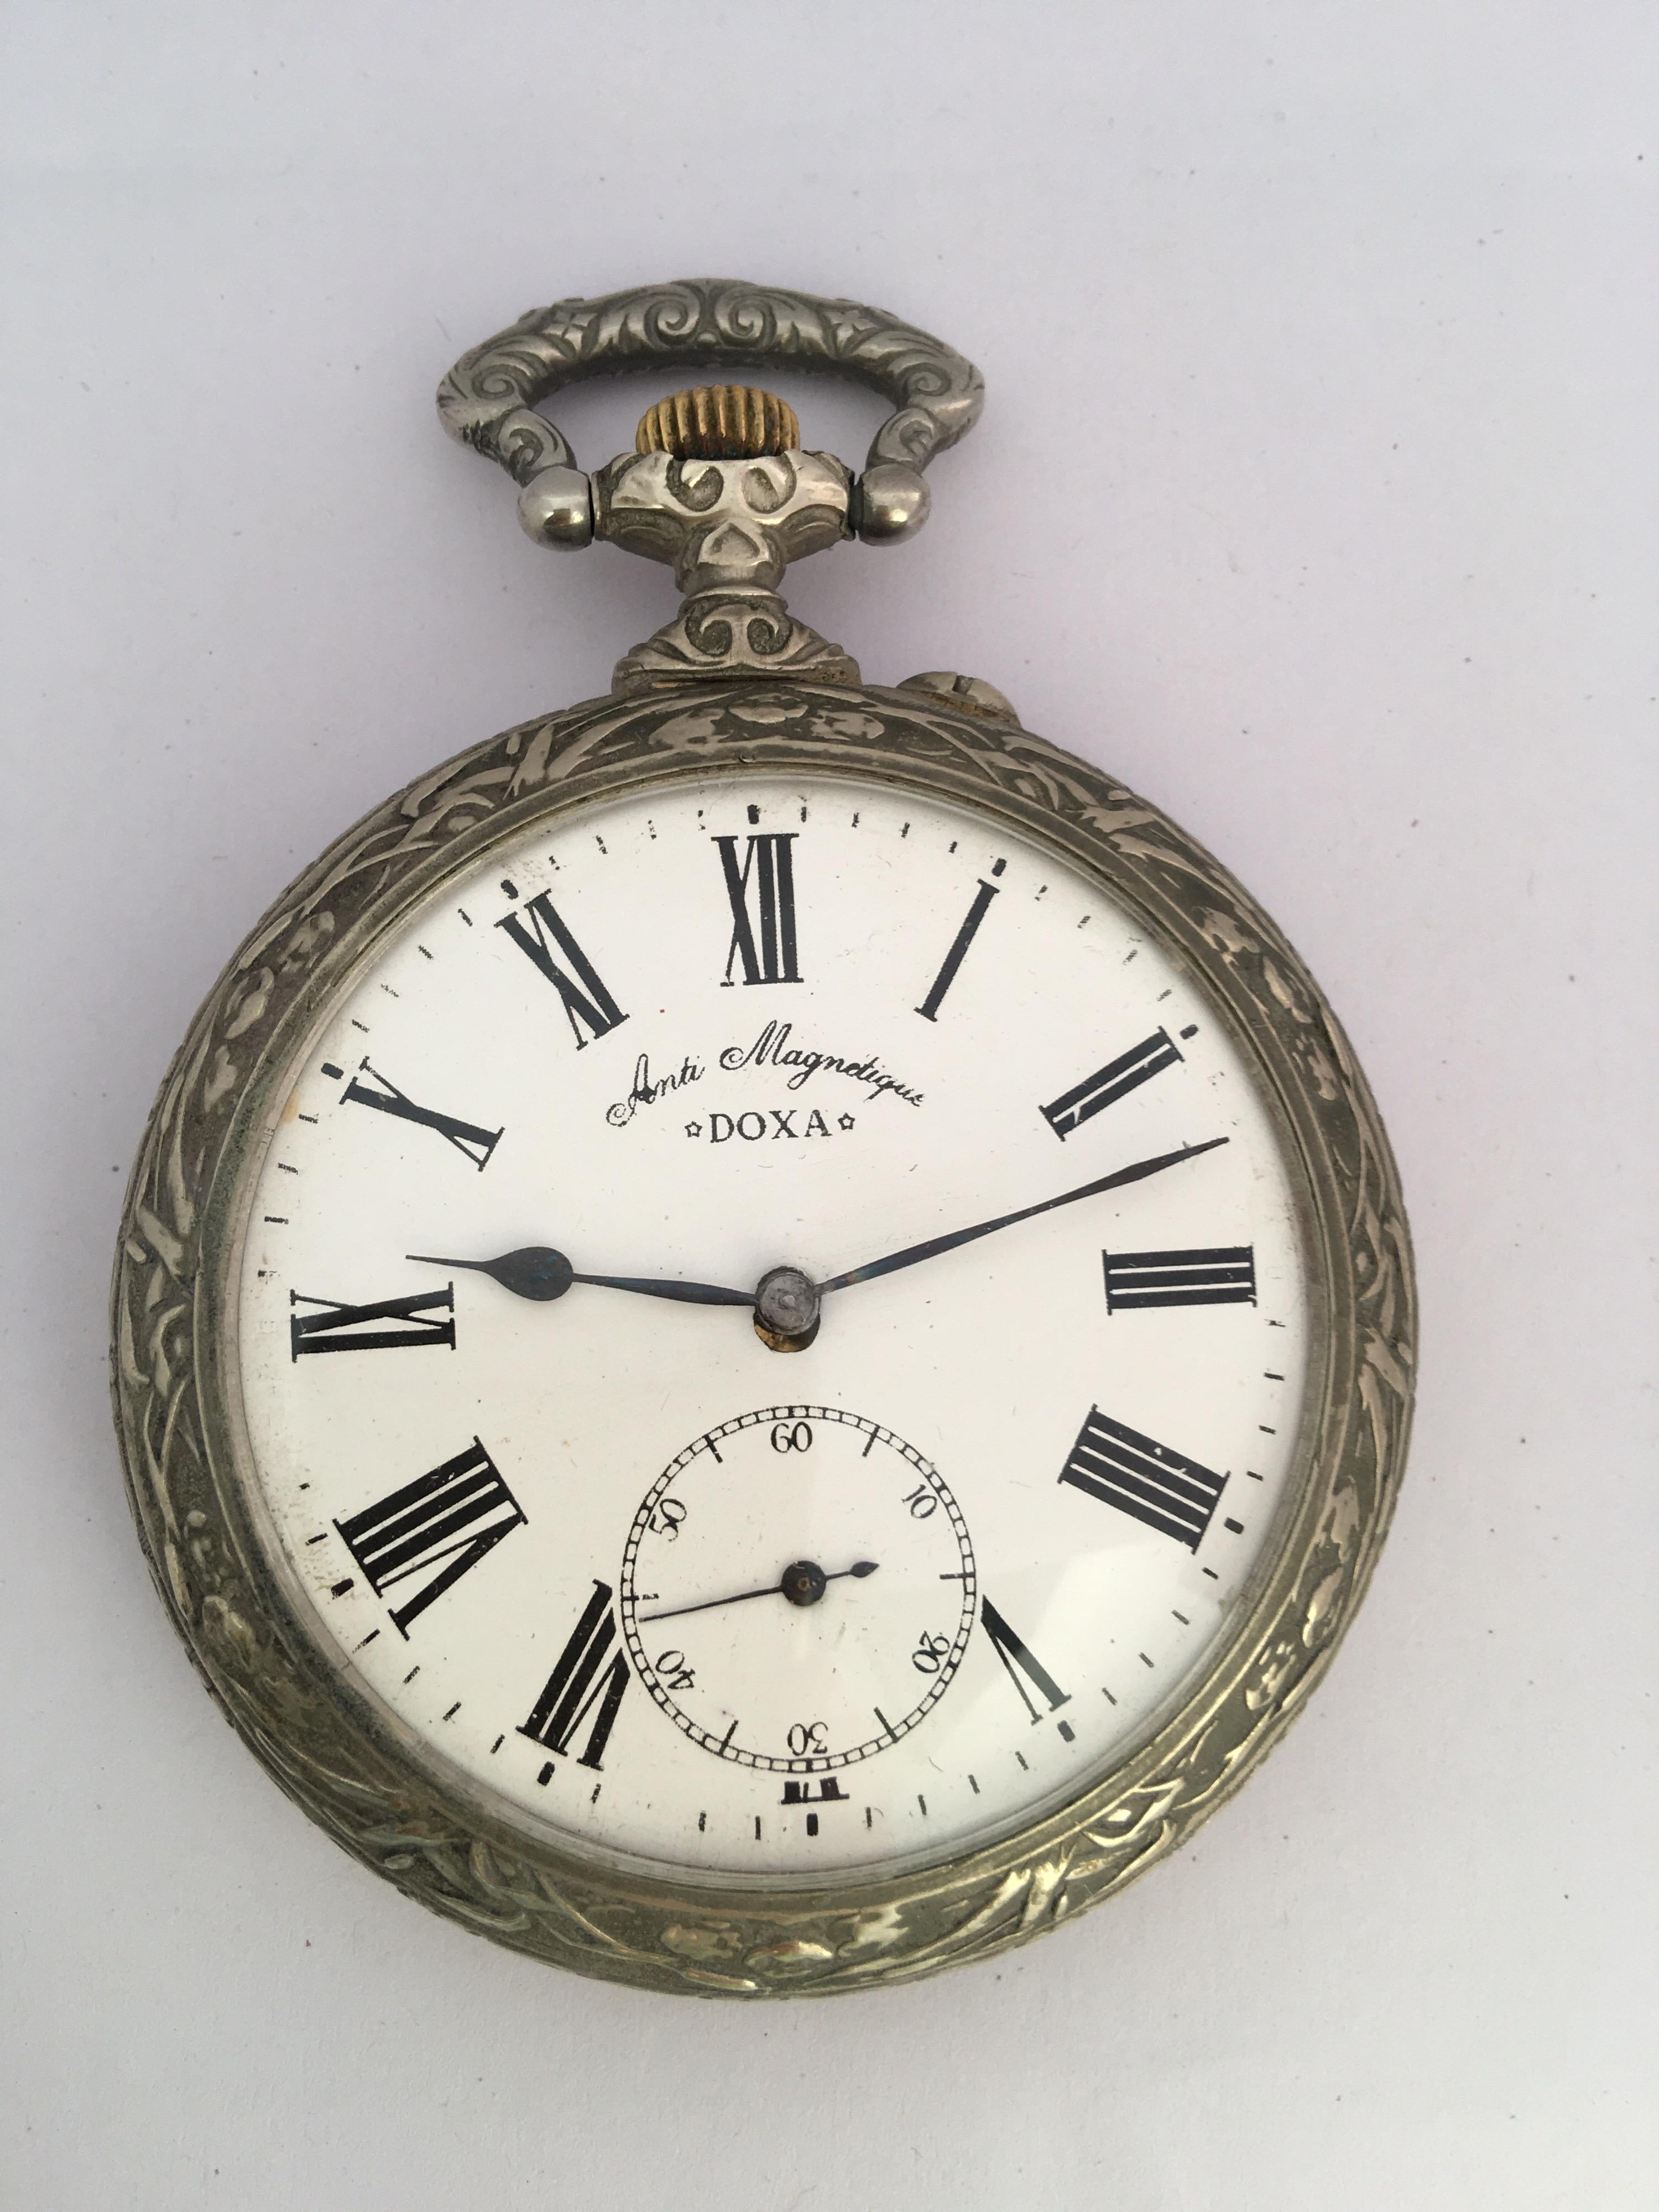 This beautiful antique bigger size 70mm diameter hand winding silver plated pocket watch is in good working condition and it is running well (It keeps a good time). It is fully engraved case depicting a “Fisherman” . Visible signs of ageing and wear